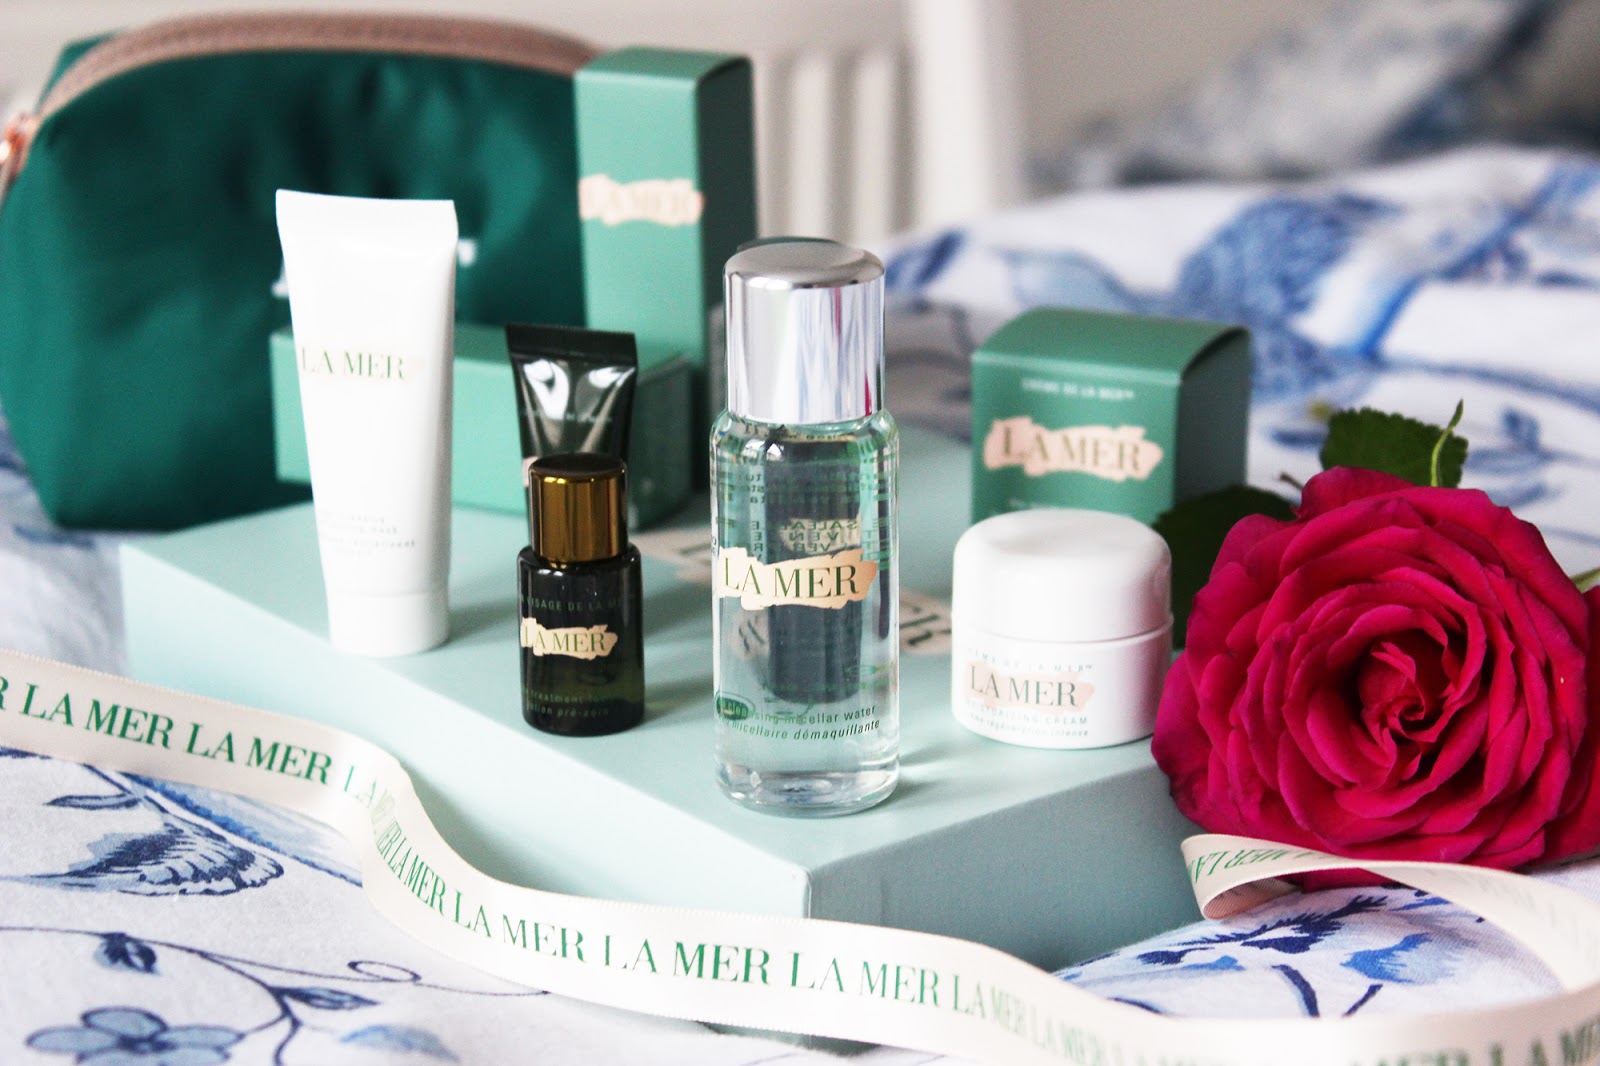 Glossybox La Mer limited edition box contents and review